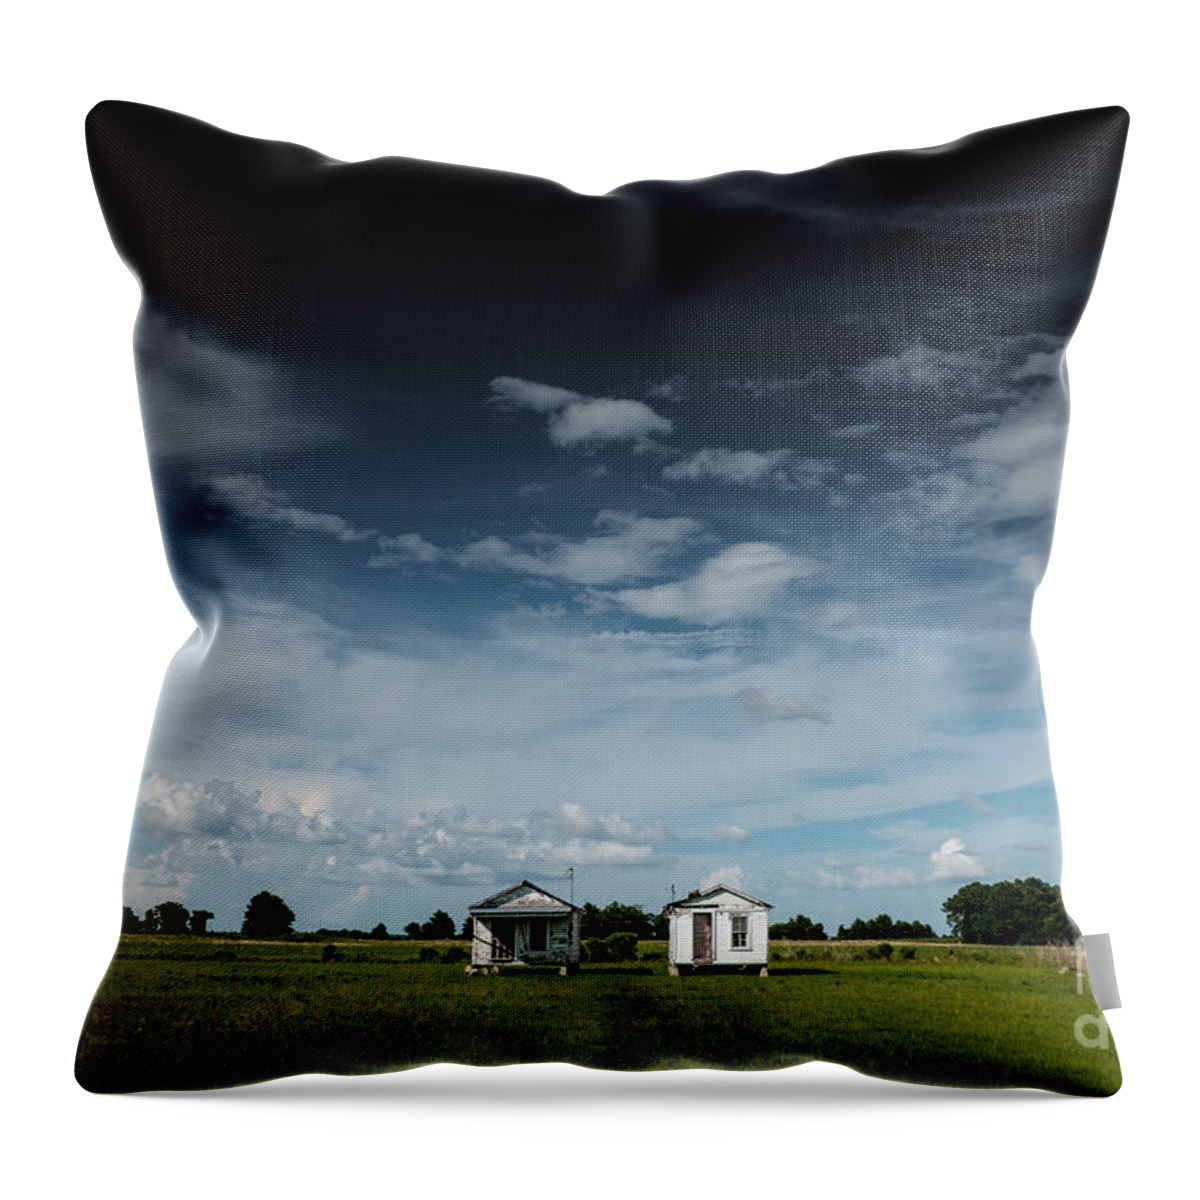 Mississippi Throw Pillow featuring the photograph Mississippi Delta Homesteads by T Lowry Wilson